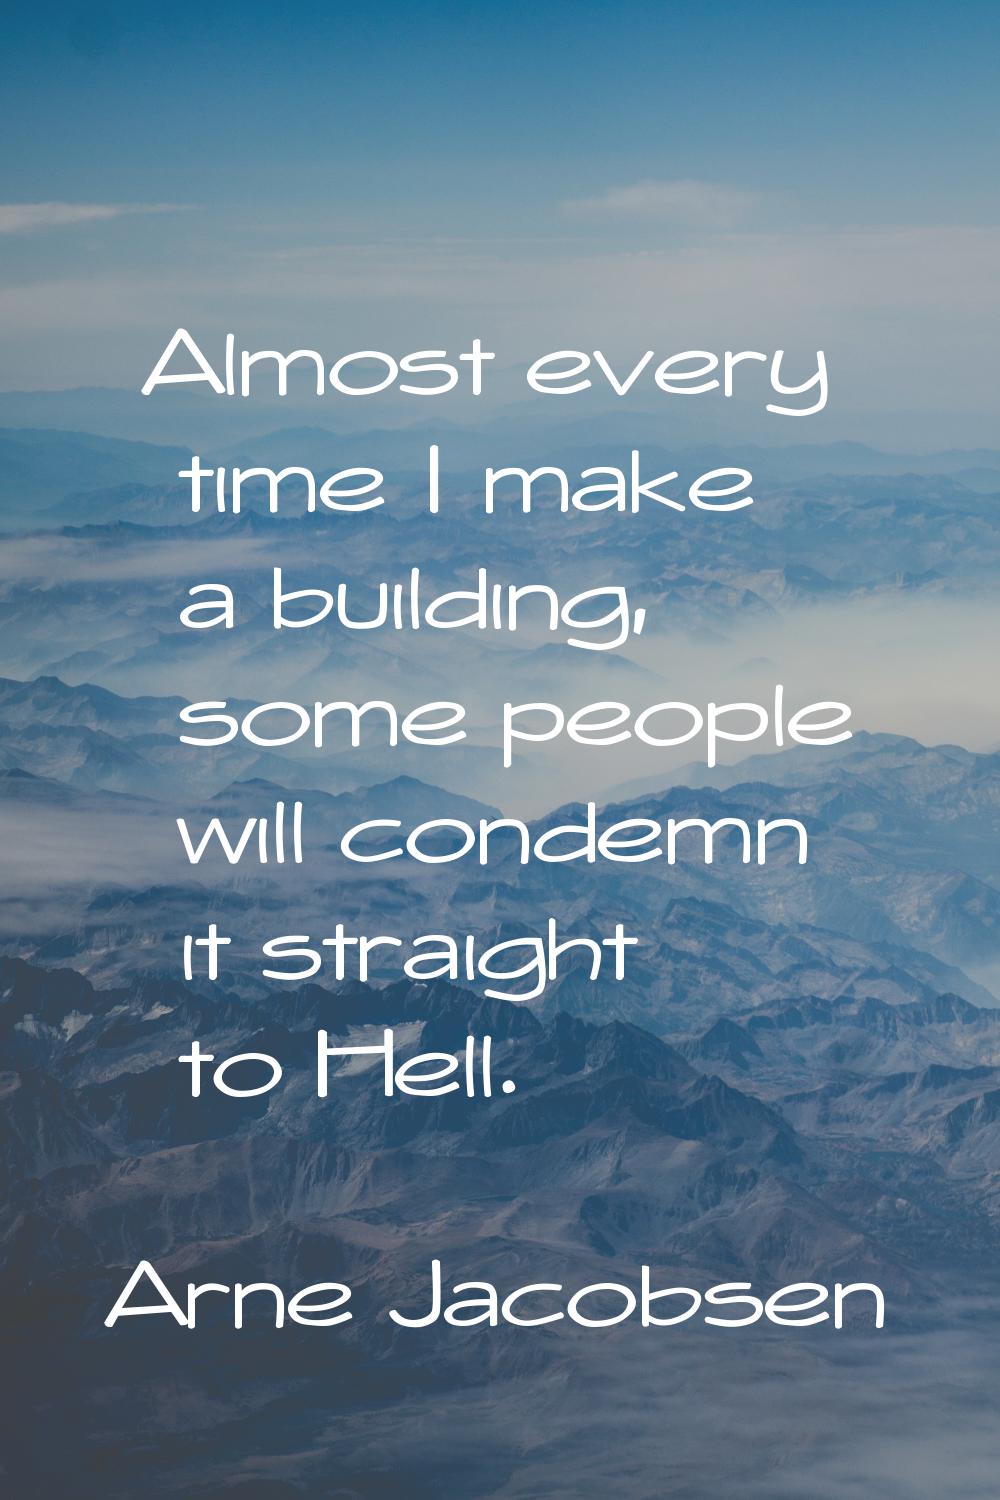 Almost every time I make a building, some people will condemn it straight to Hell.